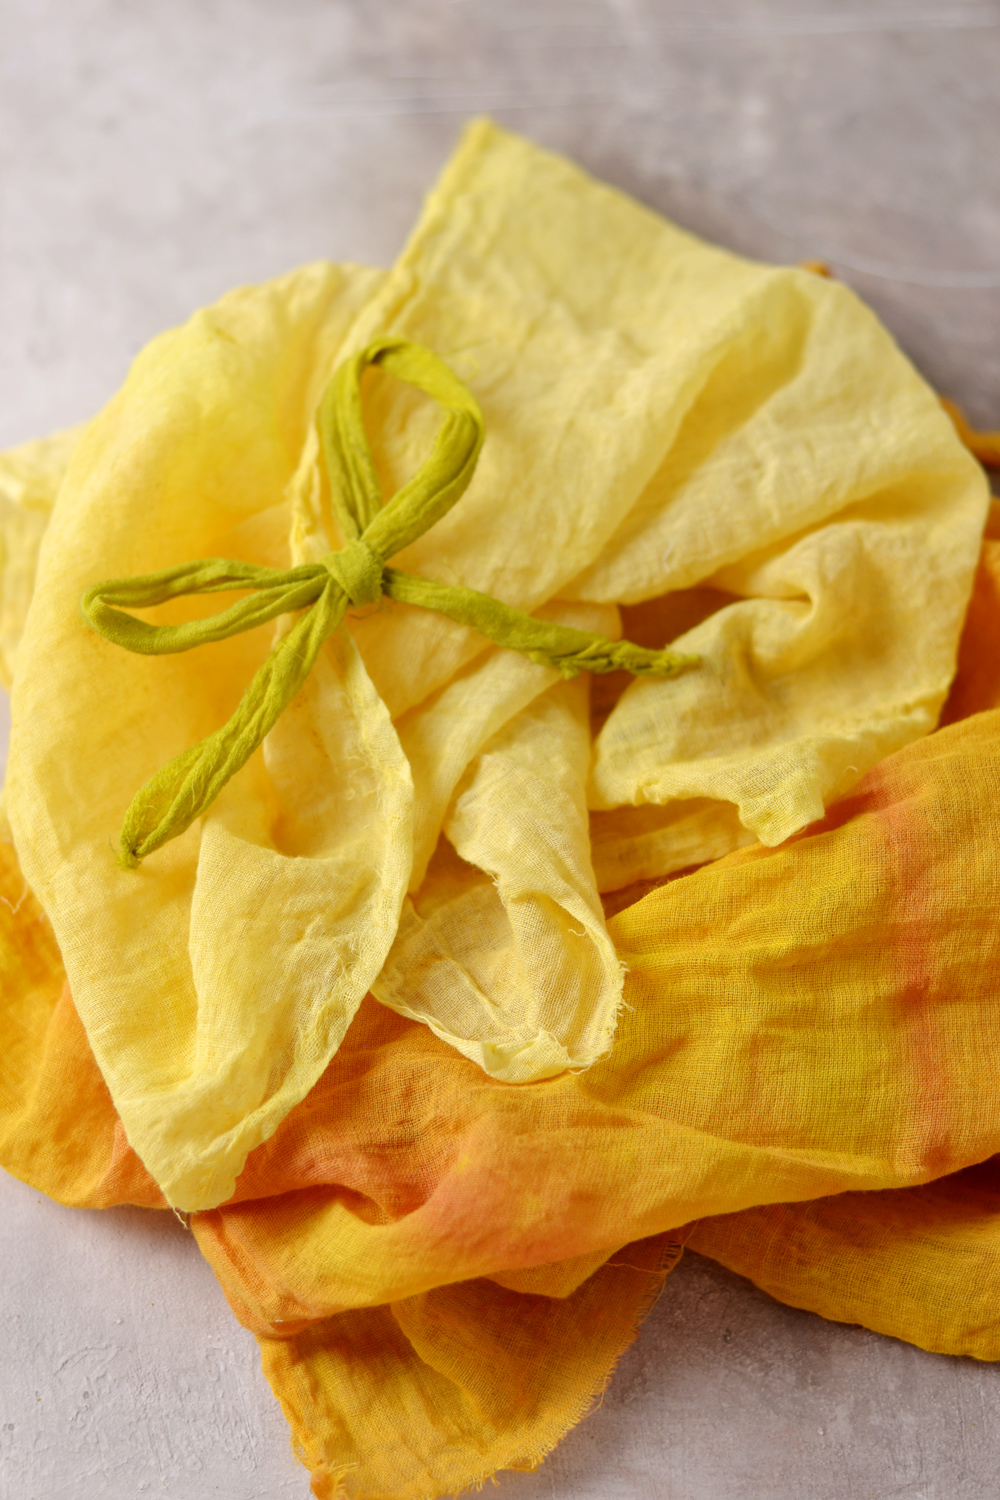 How to make natural dyes for fabric - a few beautiful and colorful